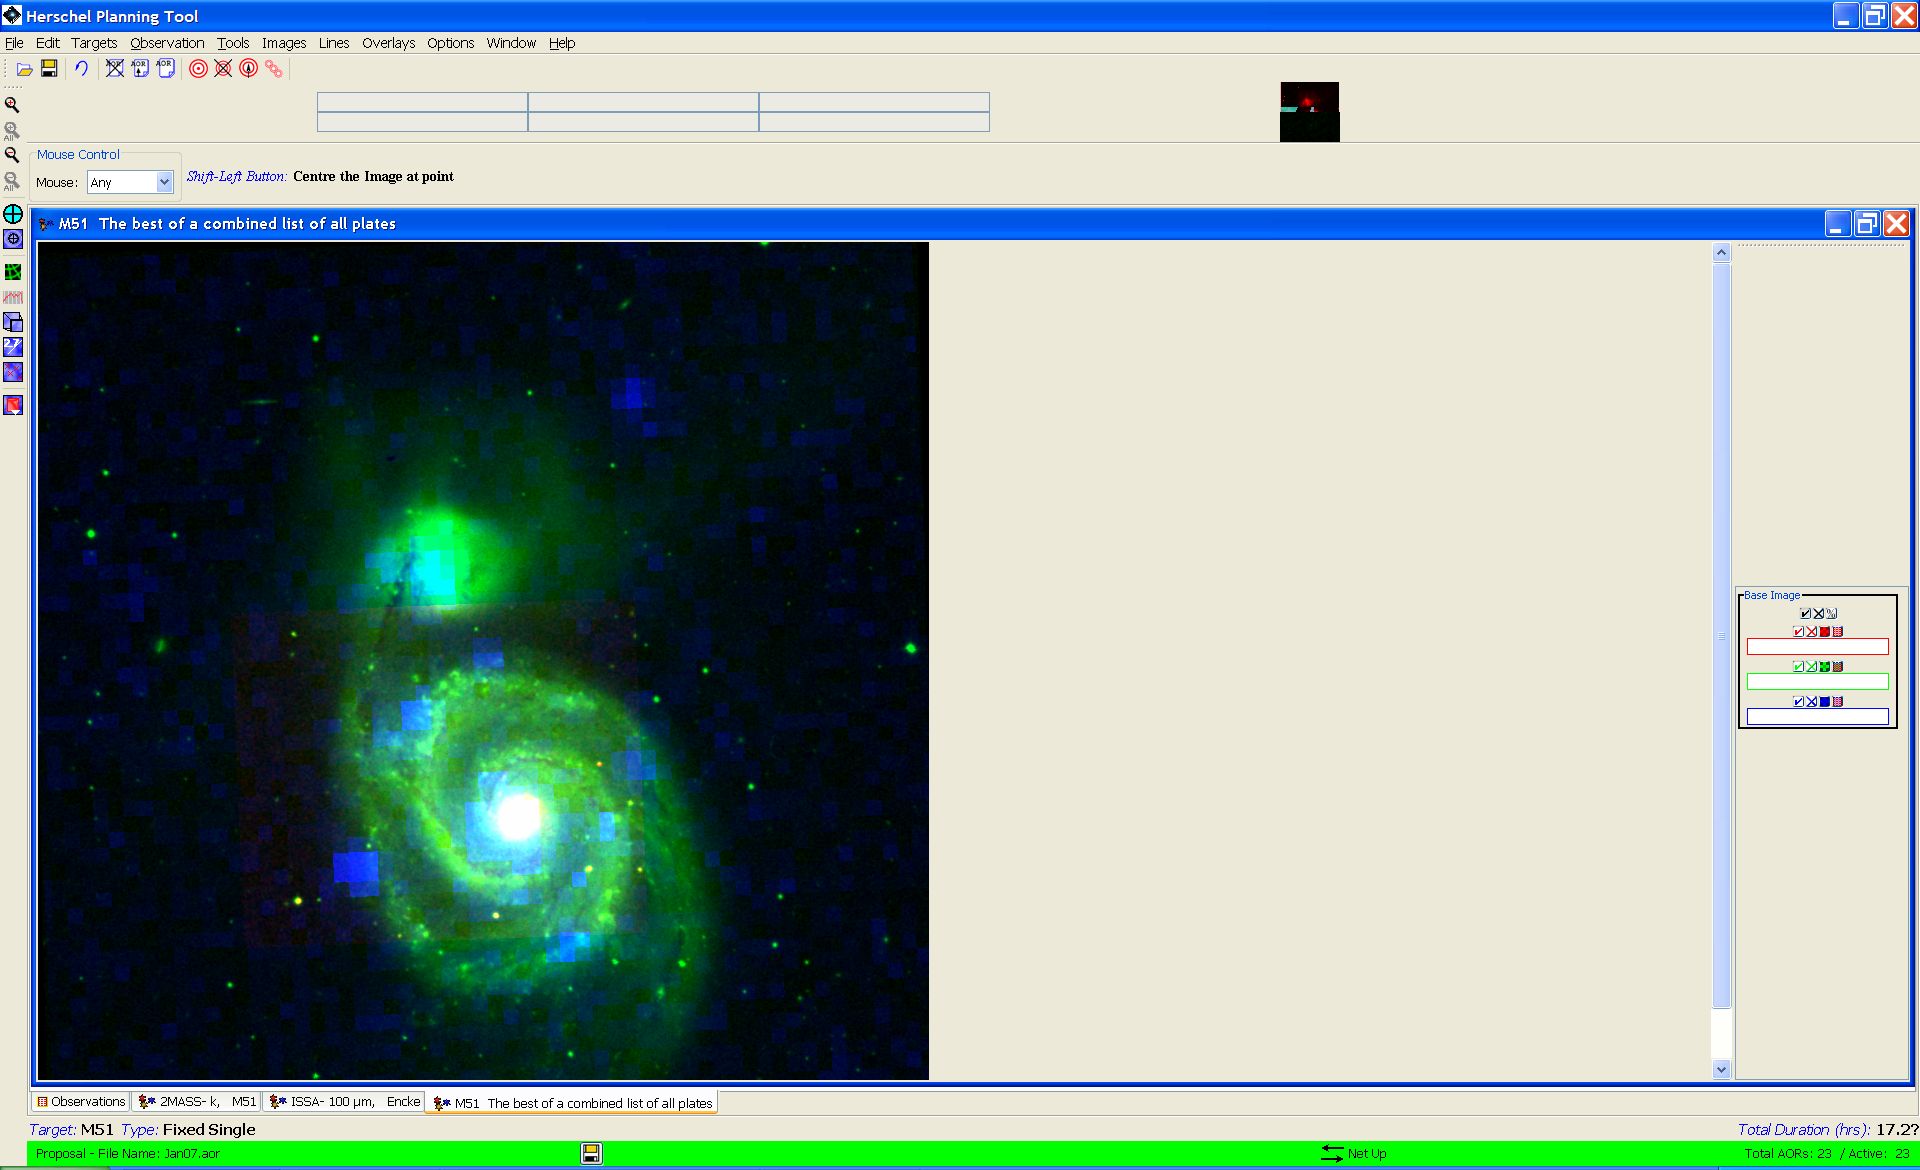 A three-colour composite image display for M51 - the DSS image is mapped into green, the 2MASS Ks image is mapped into red, and the ROSAT PSPC into the blue layer. Note that there is only partial overlap between the fields of view of the three images.